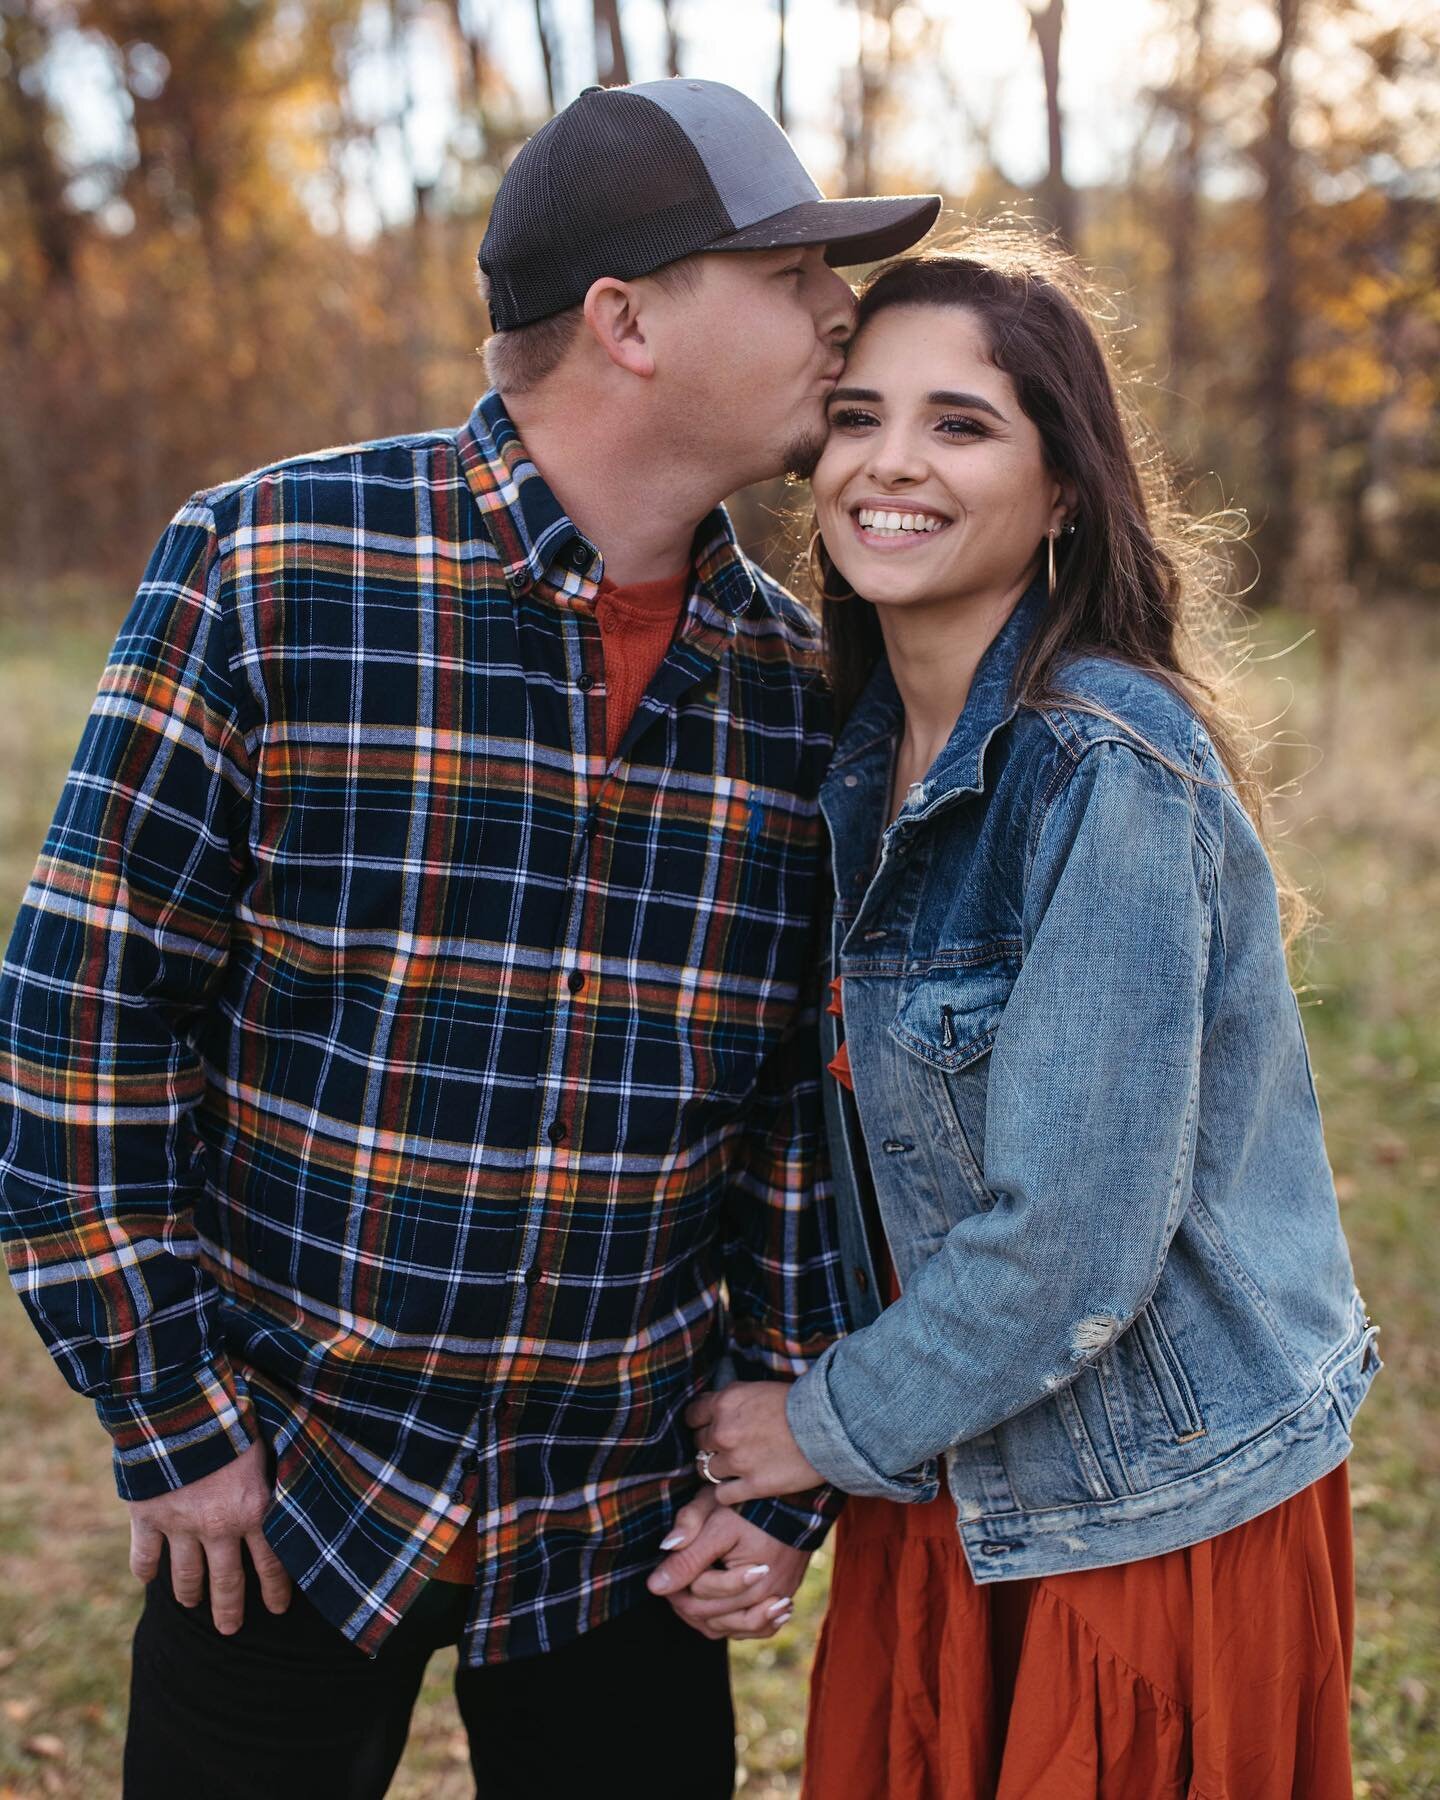 The fall colors decided to stick around but I&rsquo;m not mad about it🍁am I the only one not ready for winter? 

Saturday afternoon was spent roaming around fields with these two as we took their engagement photos. It was the most beautiful day, and